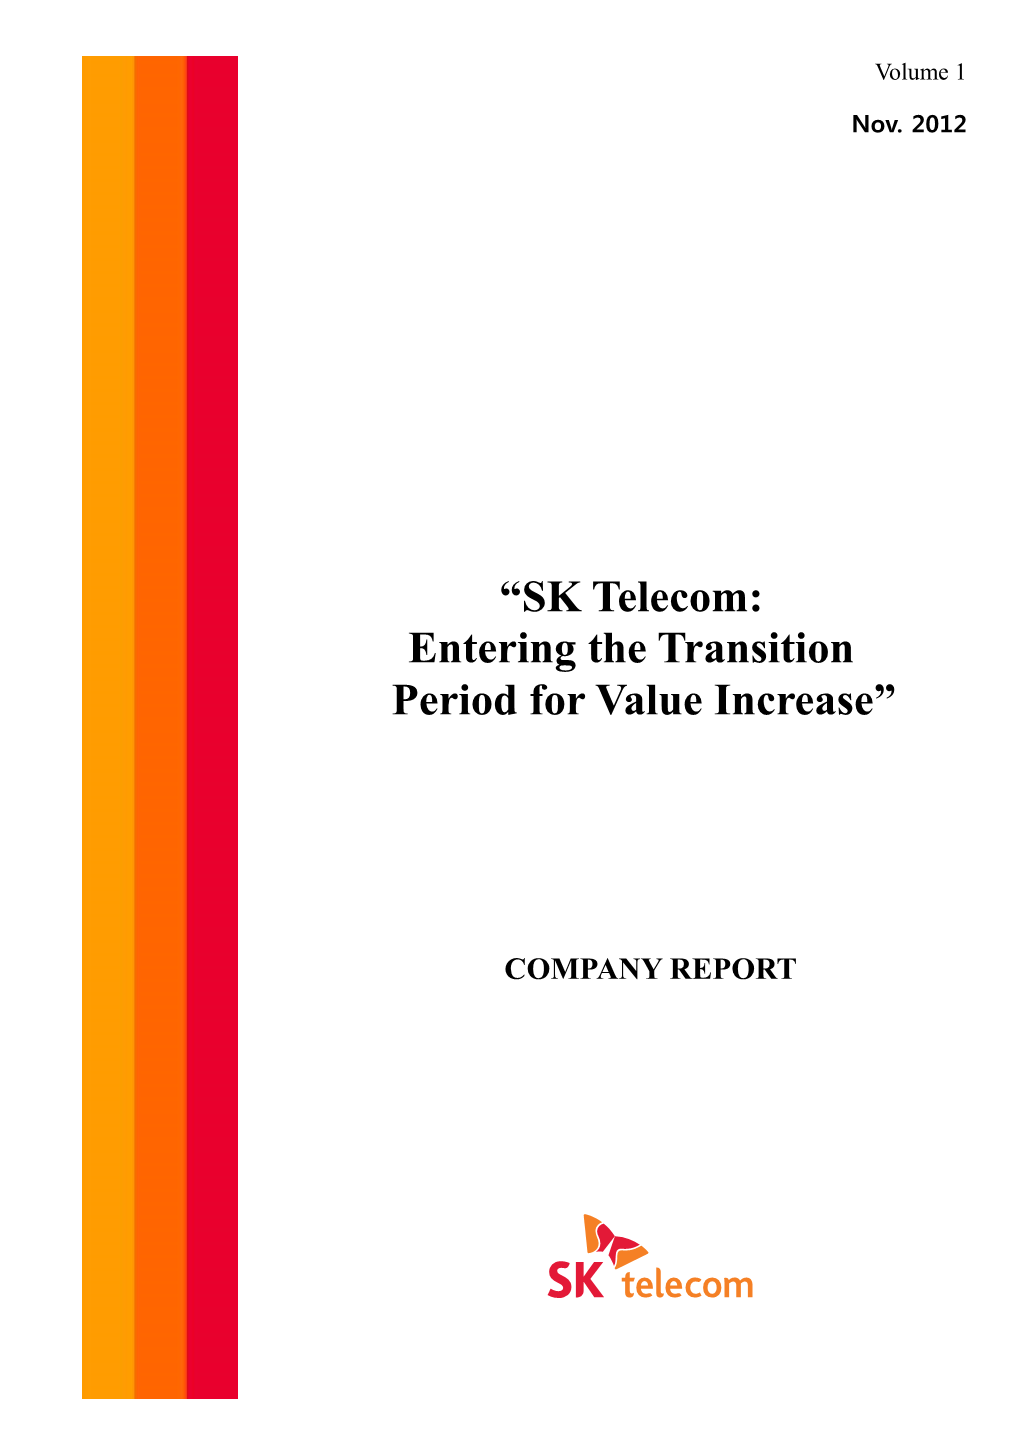 “SK Telecom: Entering the Transition Period for Value Increase”